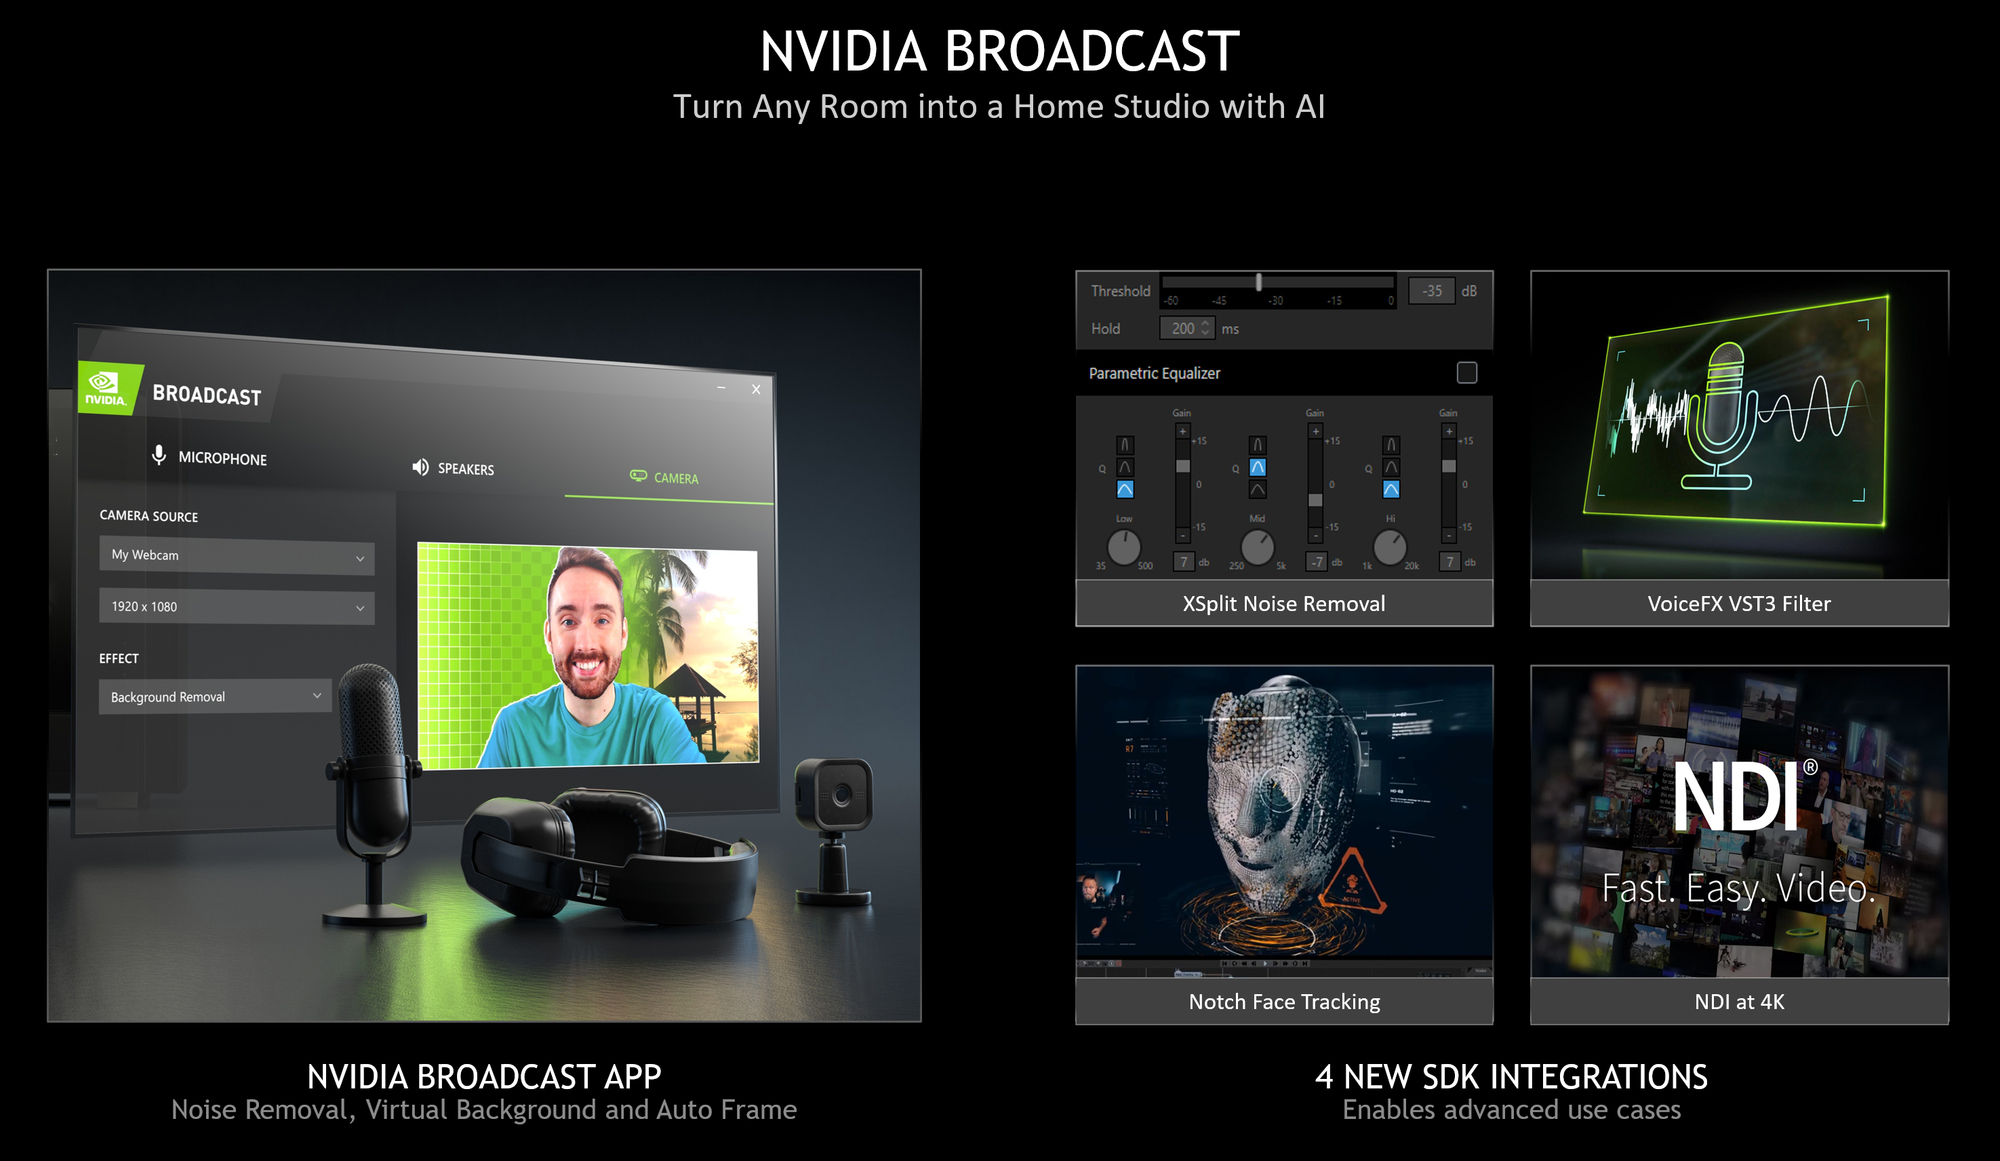 NVIDIA GeForce RTX 3060 GPU is out starting today at 9AM PST geforce-rtx-30-series-nvidia-broadcast-an-essential-tool.jpg